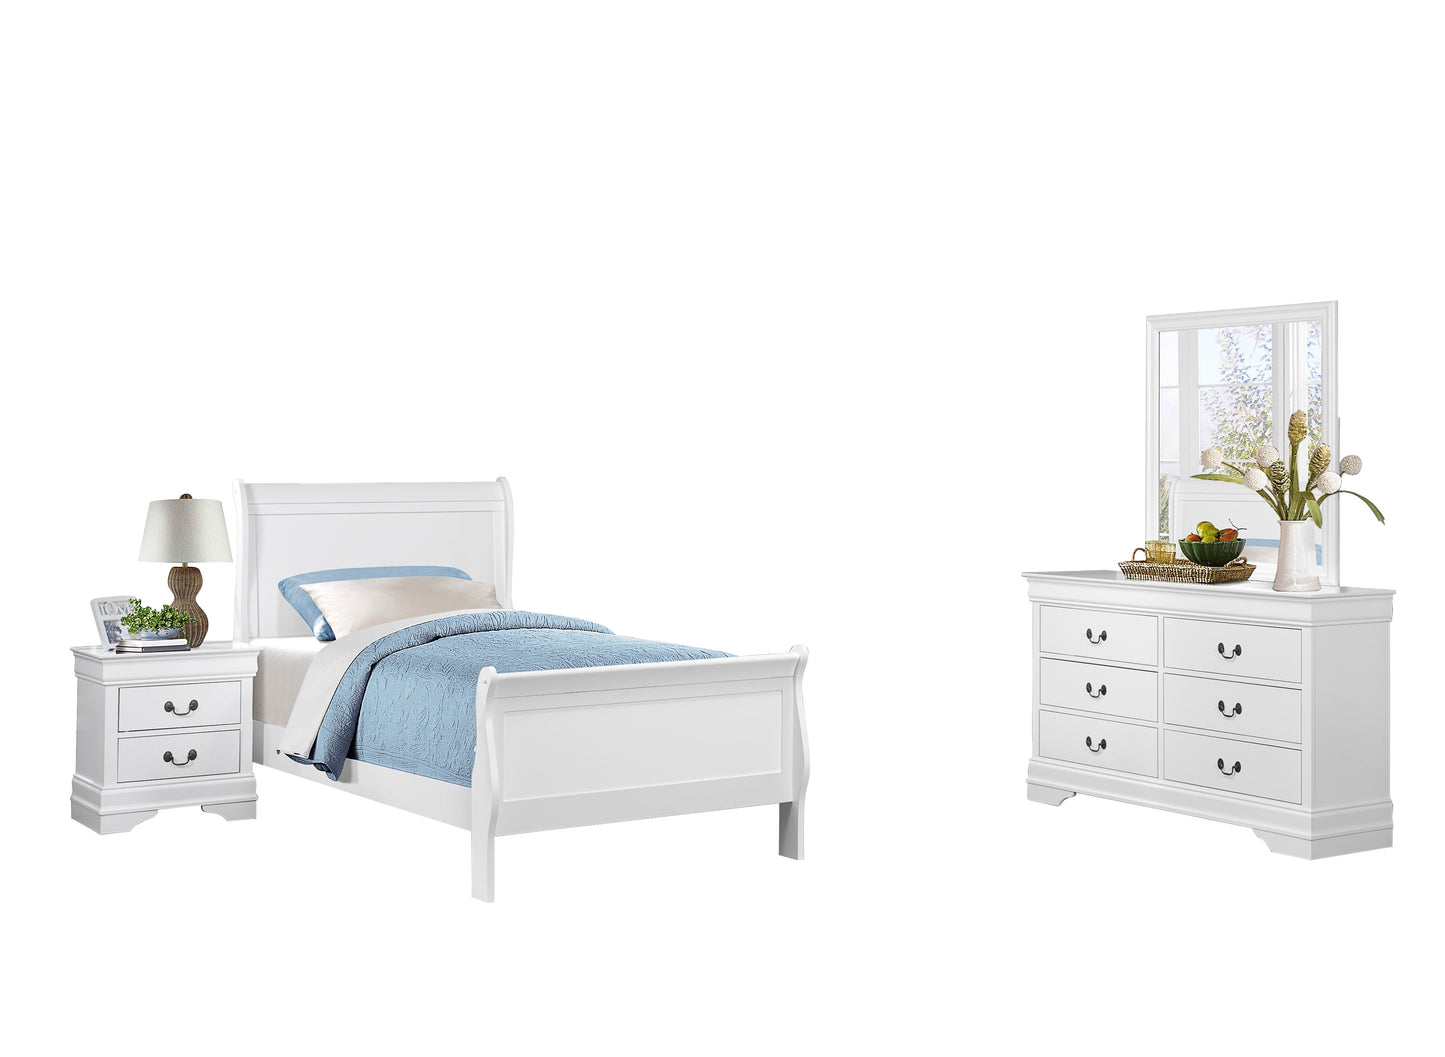 Manburg Louis Philippe 4PC Bedroom Set Full Sleigh Bed, Dresser, Mirror, Nightstand in Burnished White